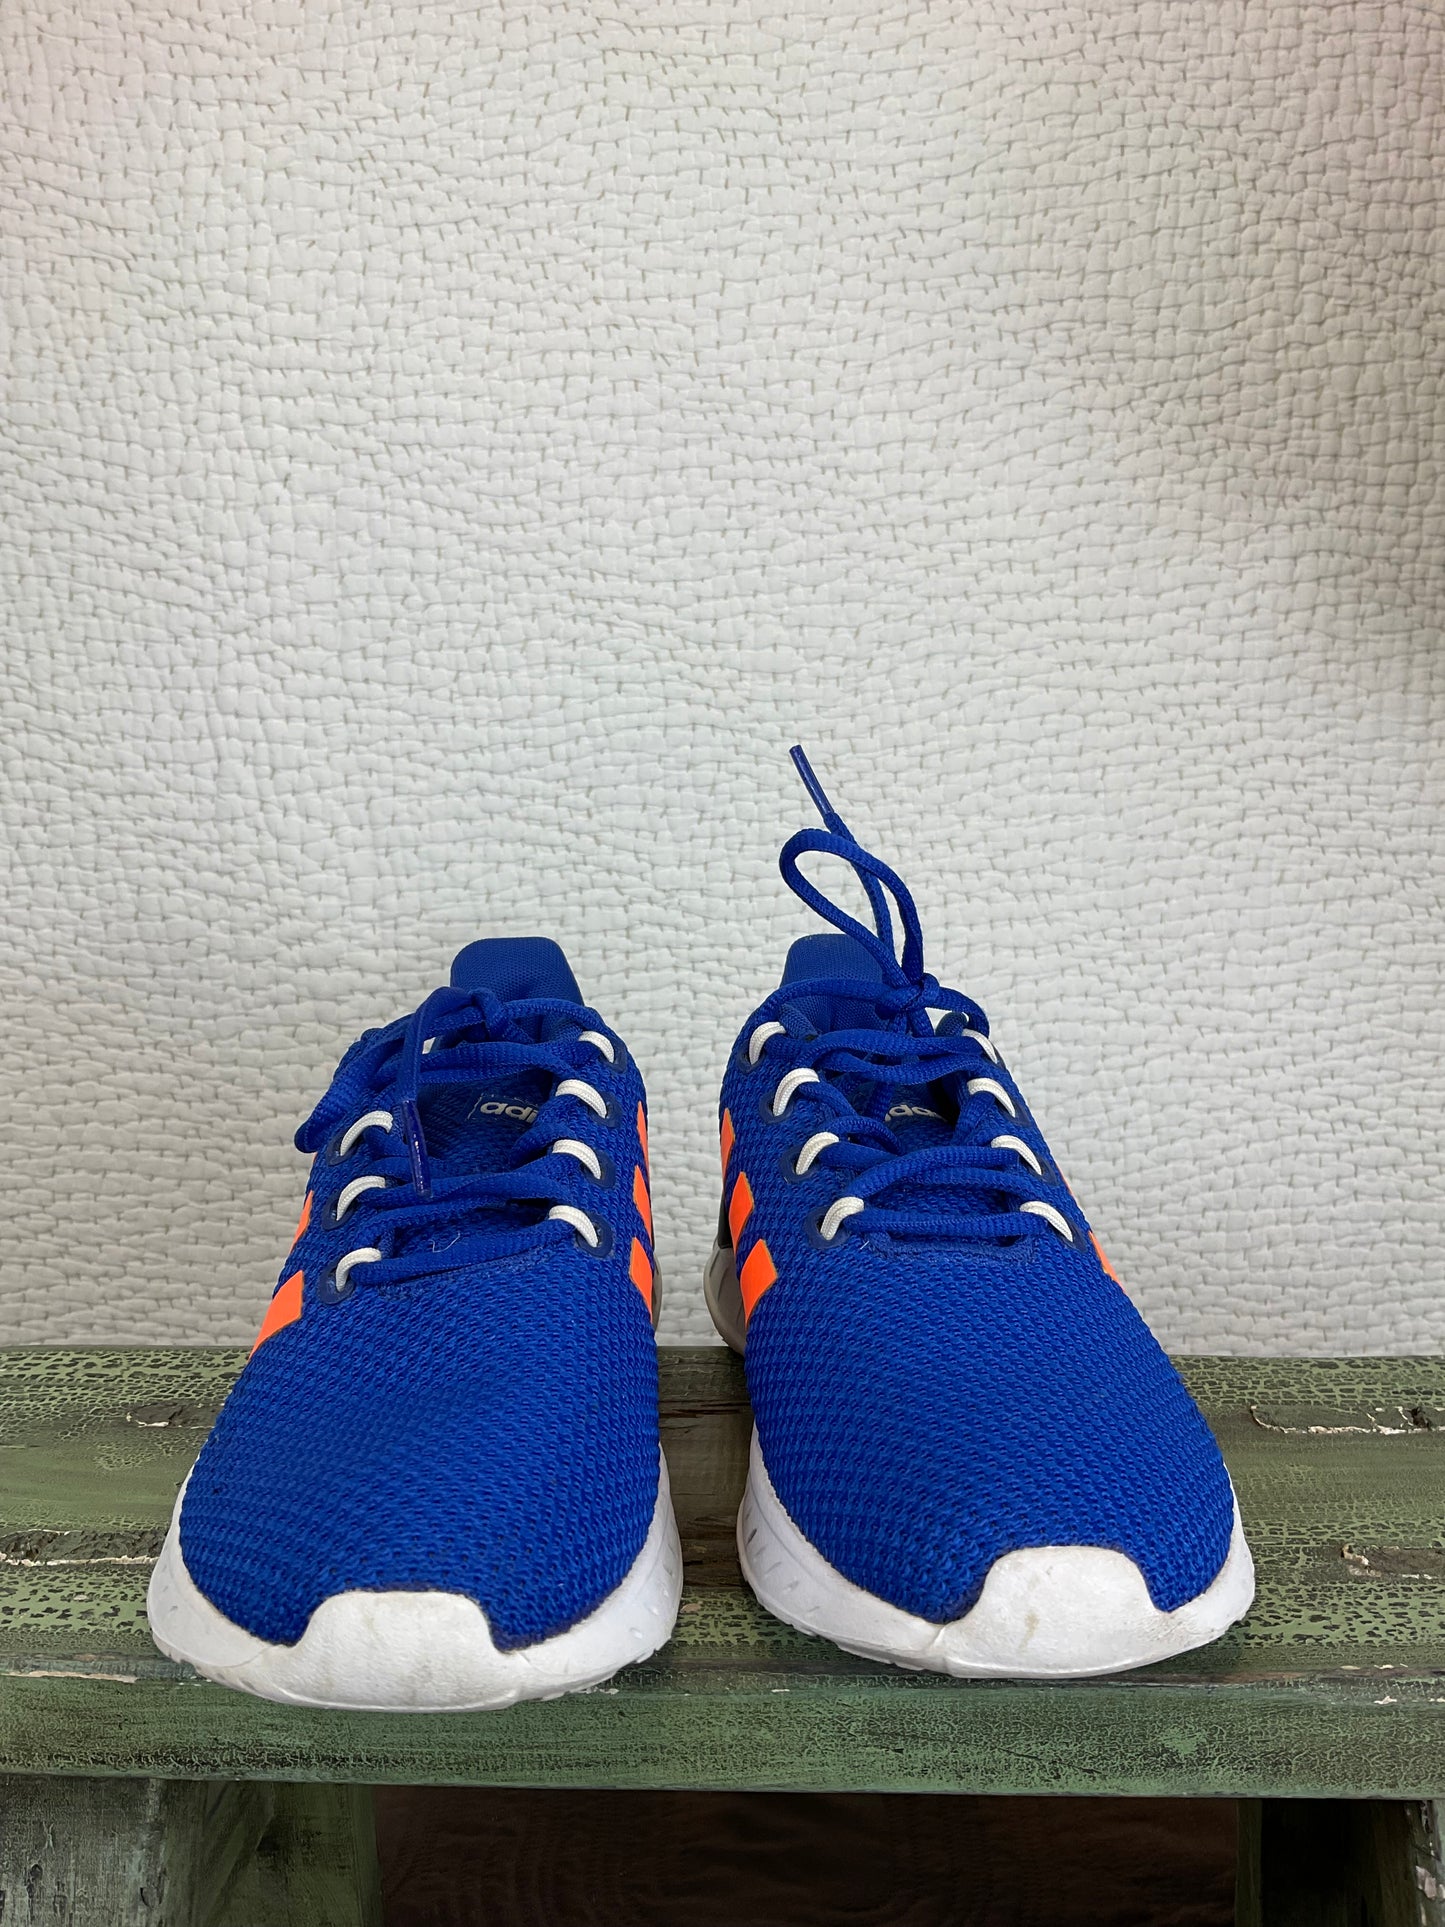 Adidas Quester Flow, Size 4.5